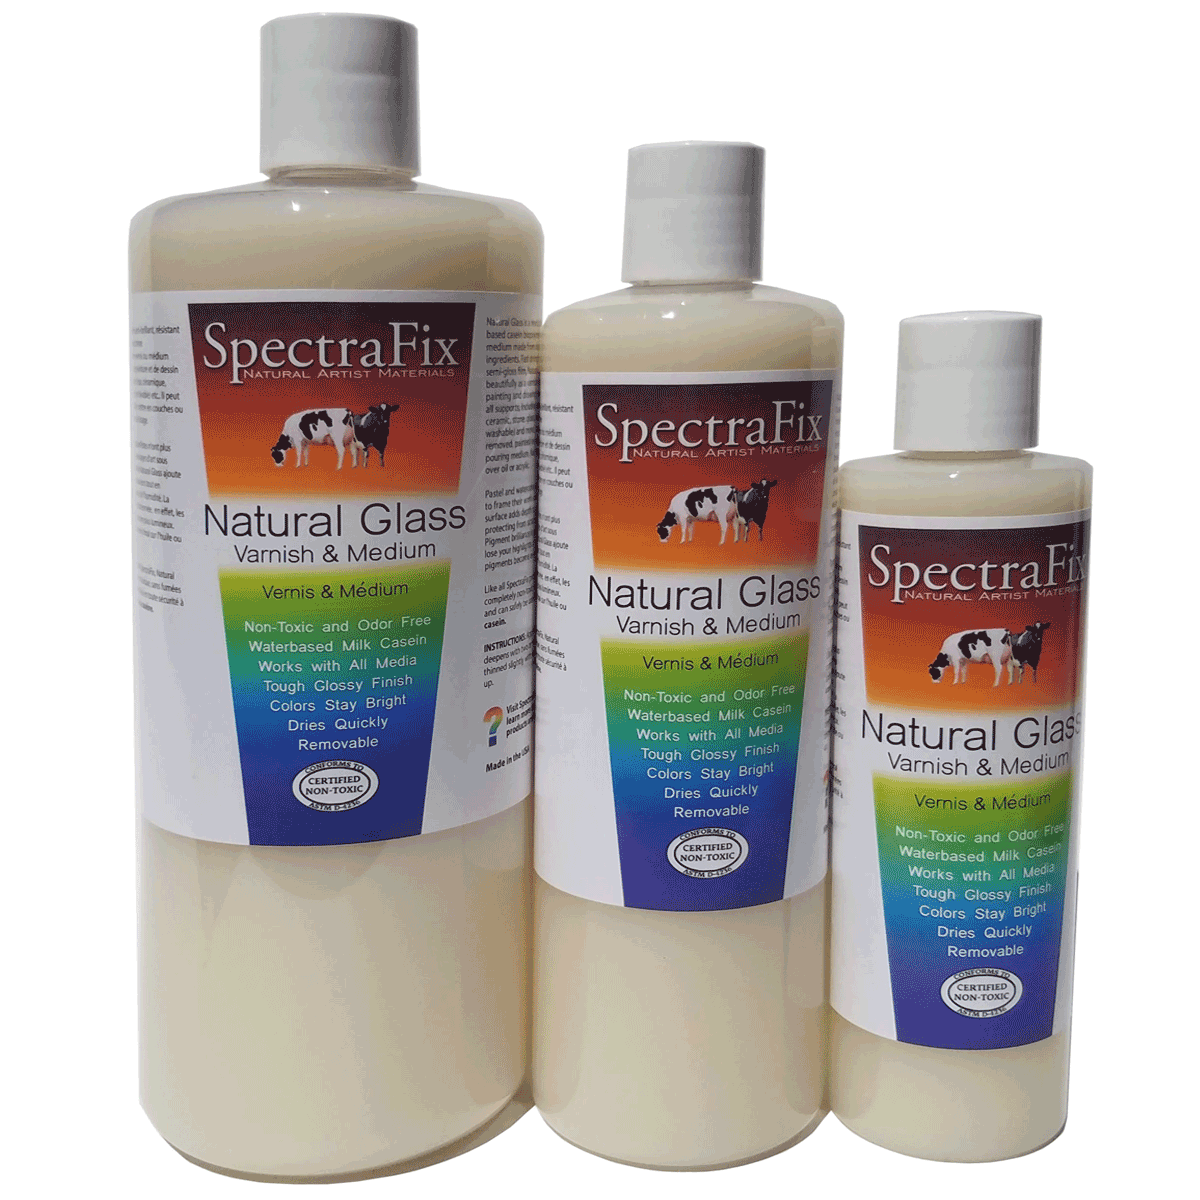 Spectra Fix Natural Glass Varnish and Painting Medium